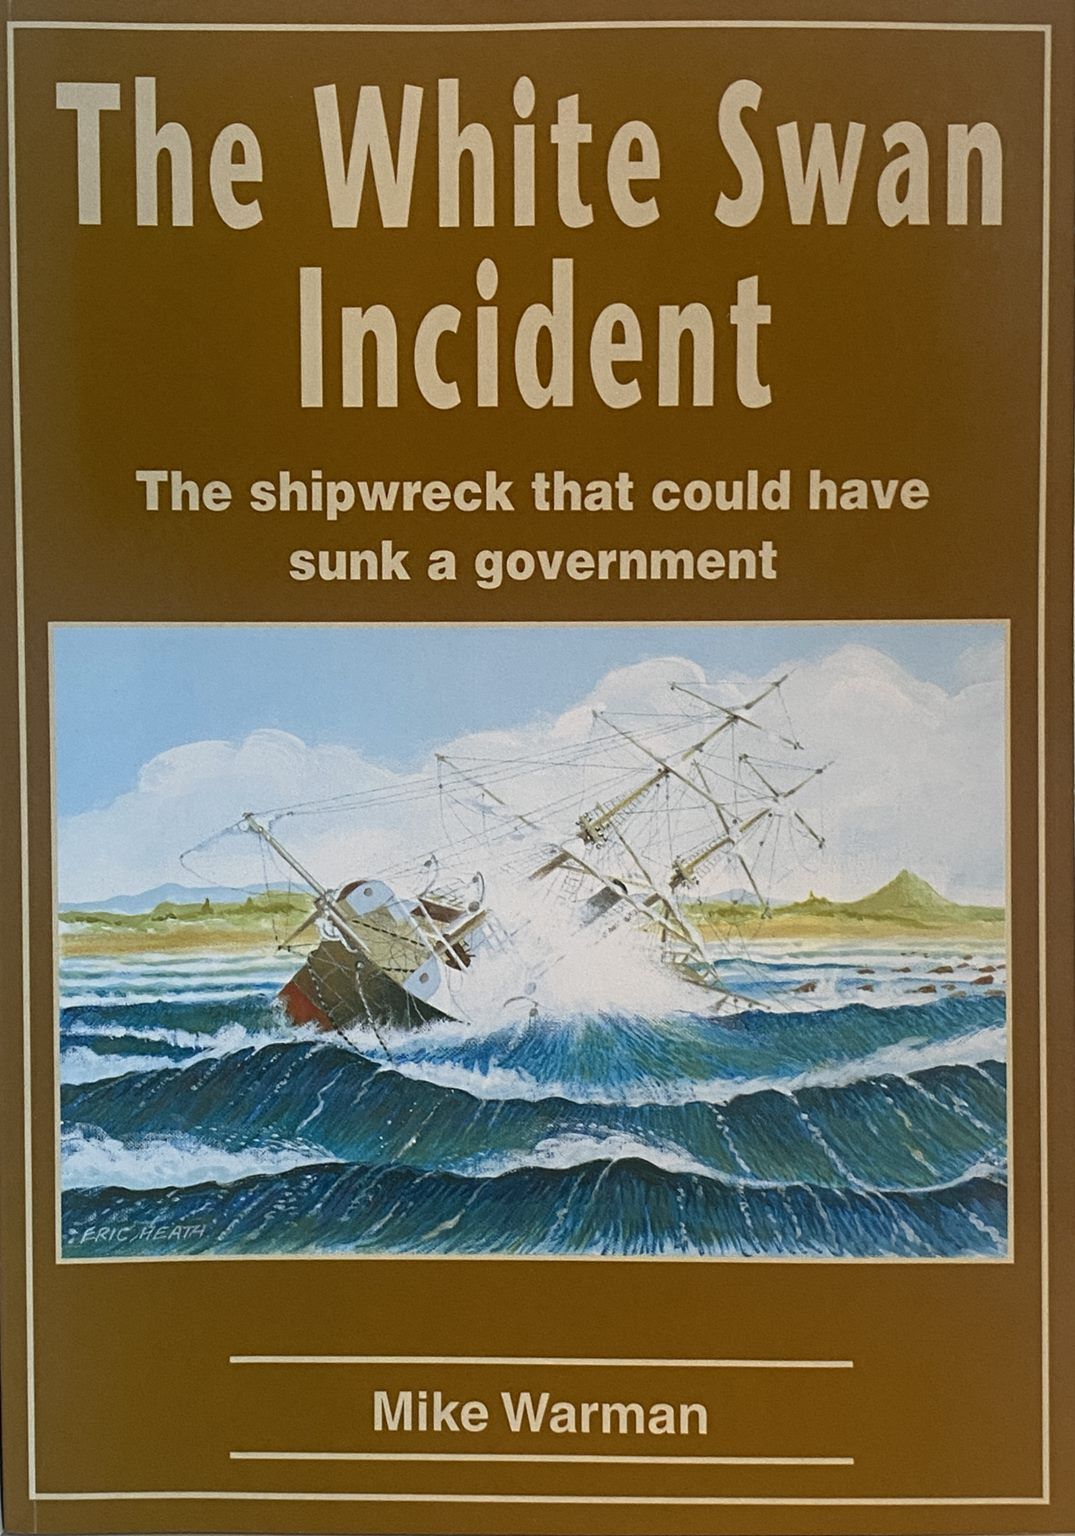 THE WHITE SWAN INCIDENT: The Shipwreck That Could Have Sunk A Government